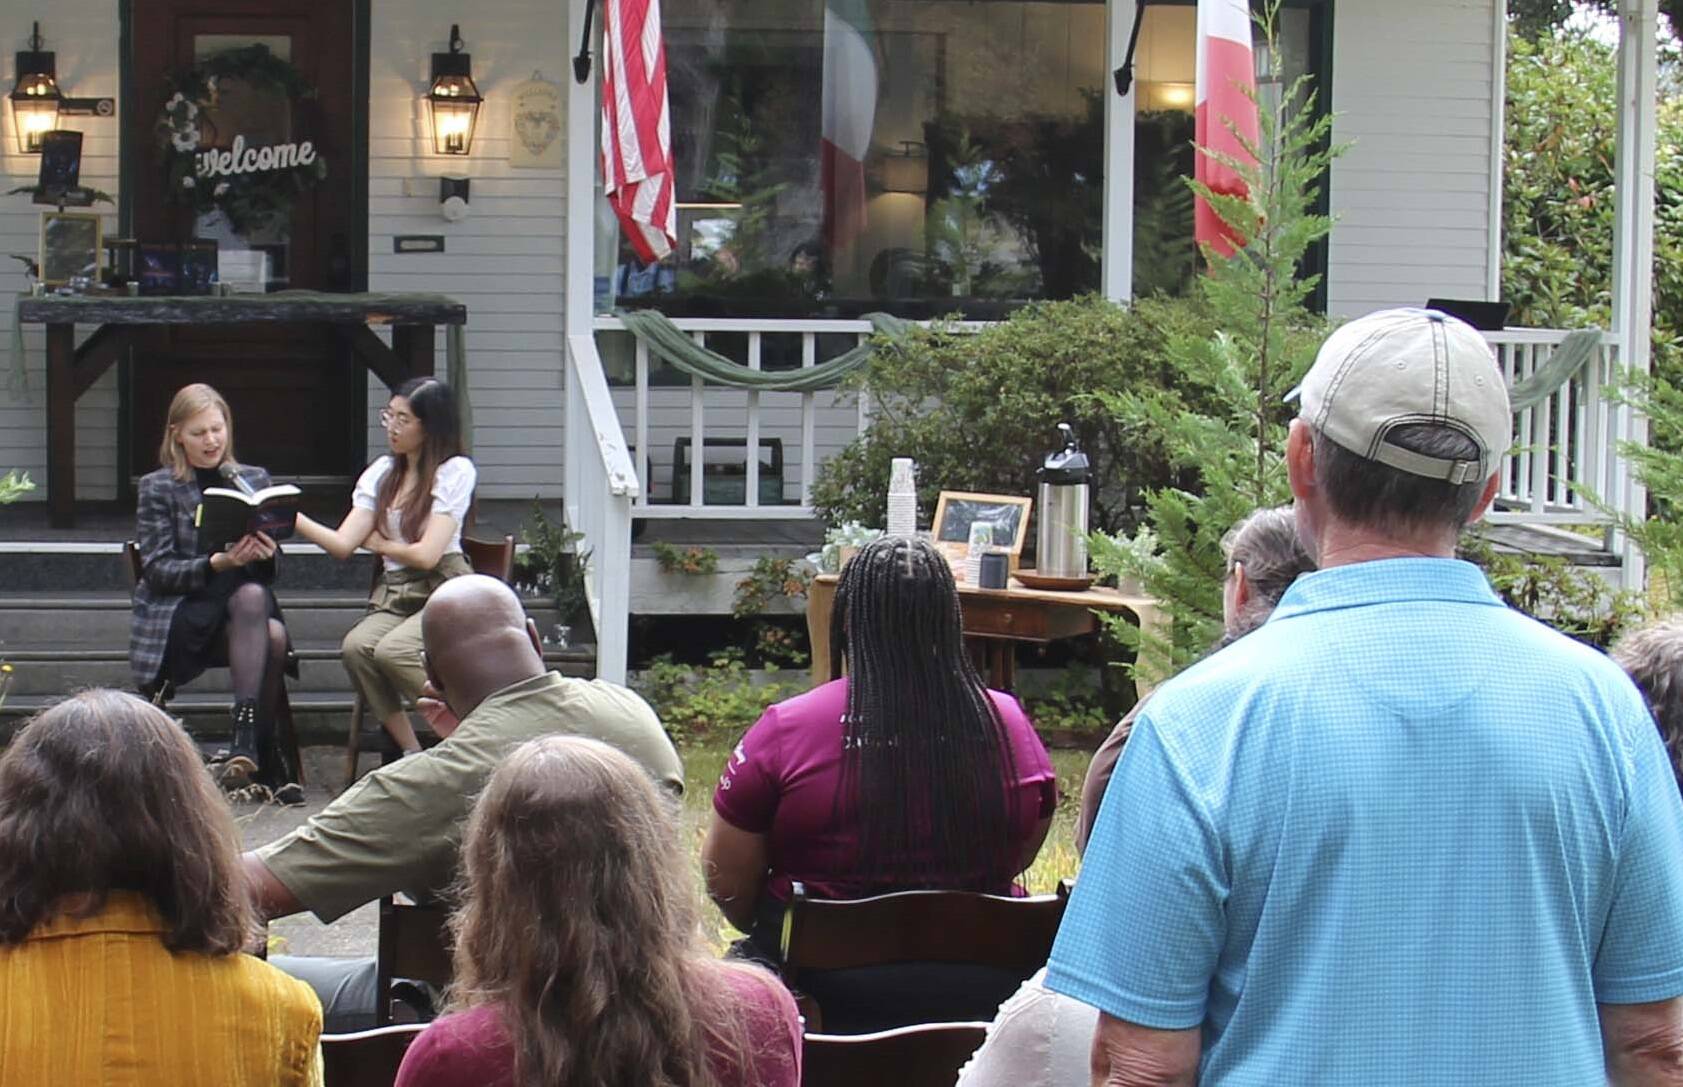 Author M.B. Thurman reads from her debut novel, Summoned, in front of the Miller Tree Inn, aka the Cullen House, during a pre-FTF event last Tuesday. M.B. (Mary Beth) and her husband Trent own the Inn. The FTF Festival also featured other authors at several other venues throughout the celebration. Photo Christi Baron